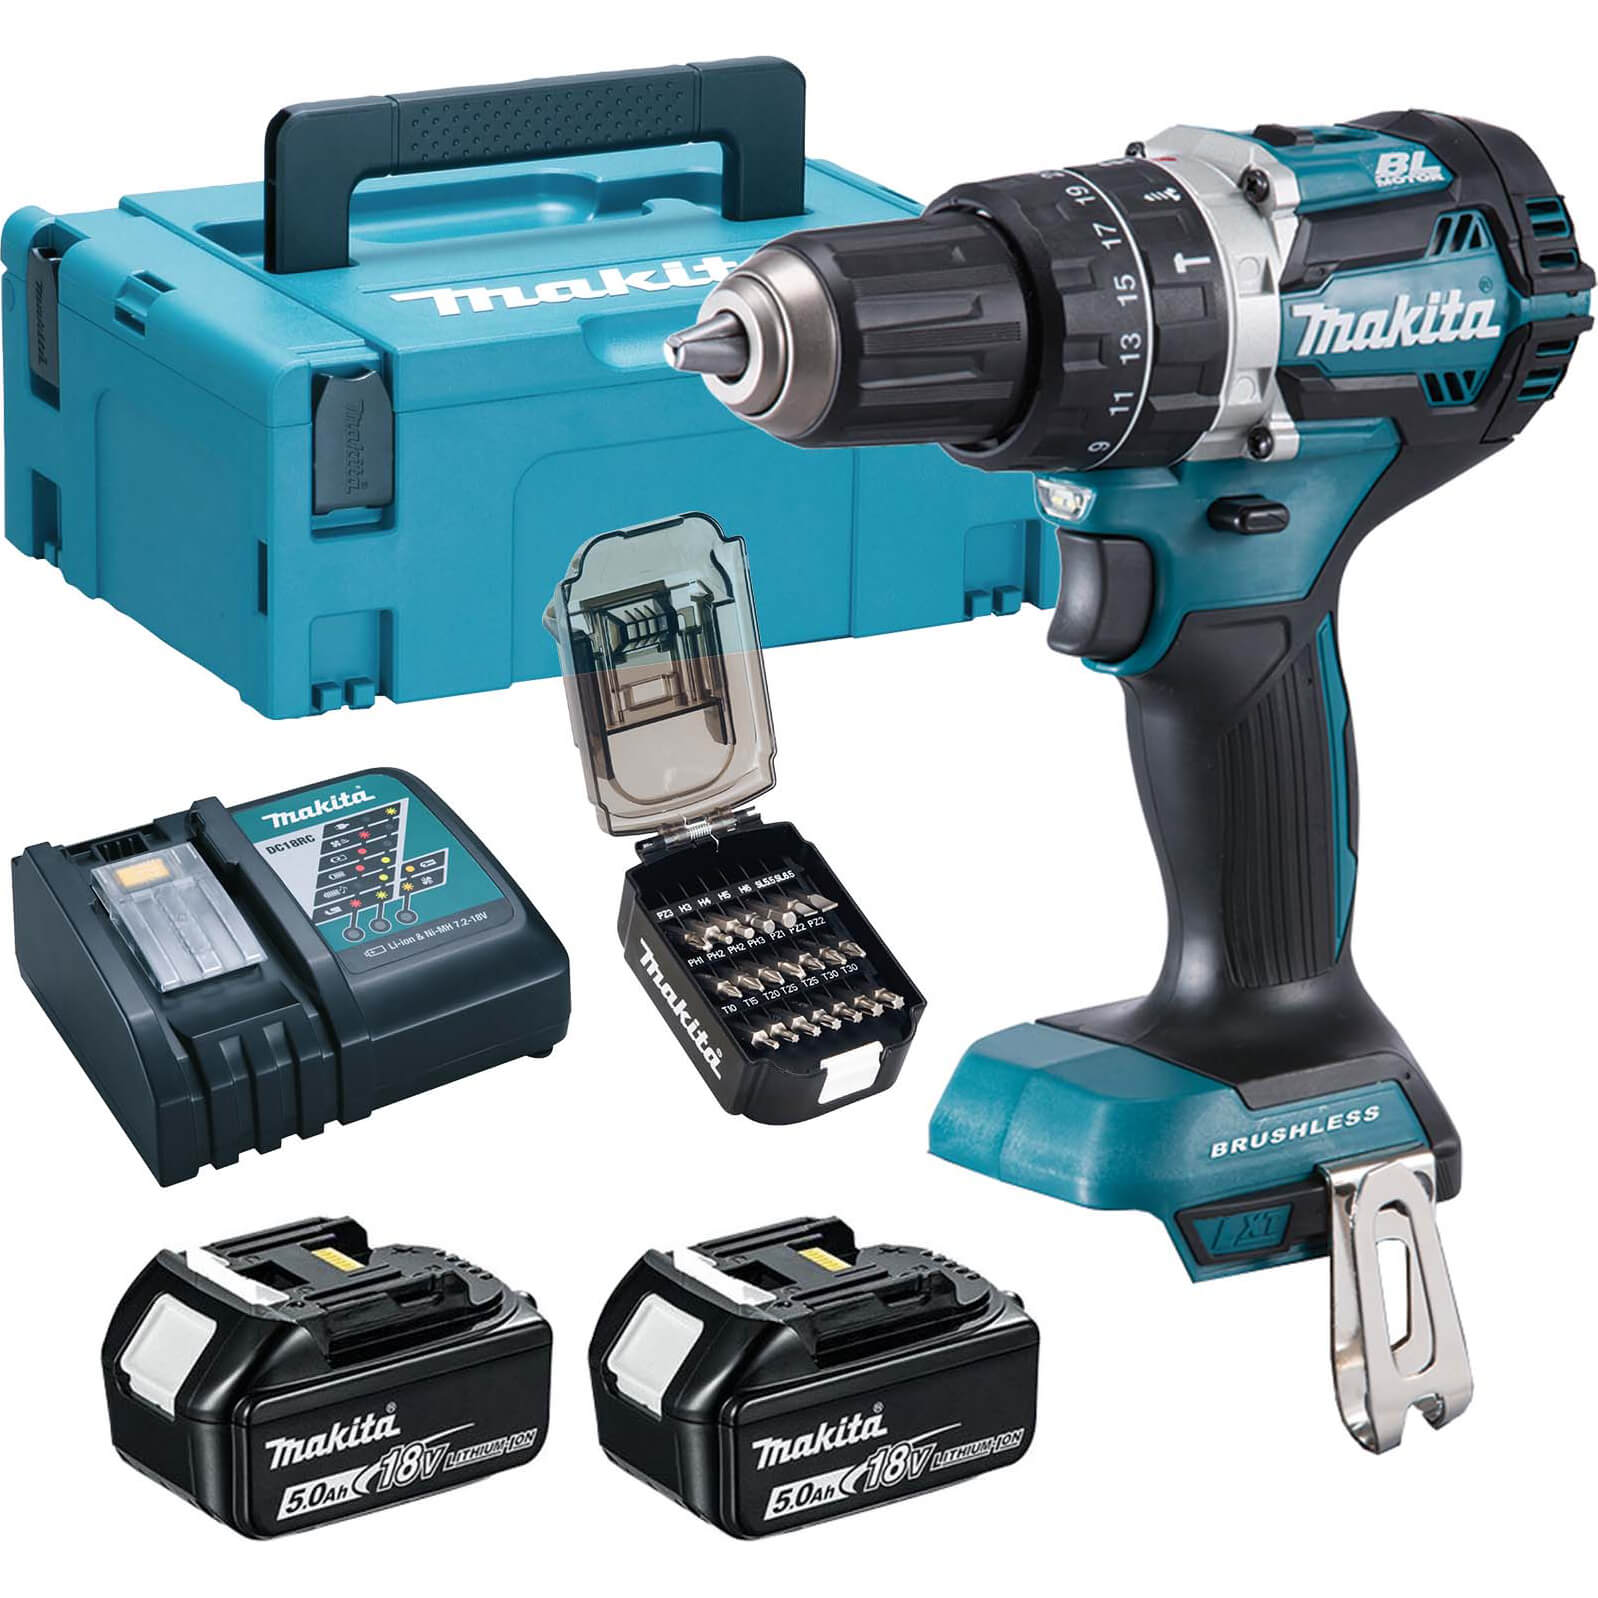 Makita DHP484 18v LXT Cordless Brushless Combi Drill 2 x 5ah Li-ion Charger Case & 21 Accessories